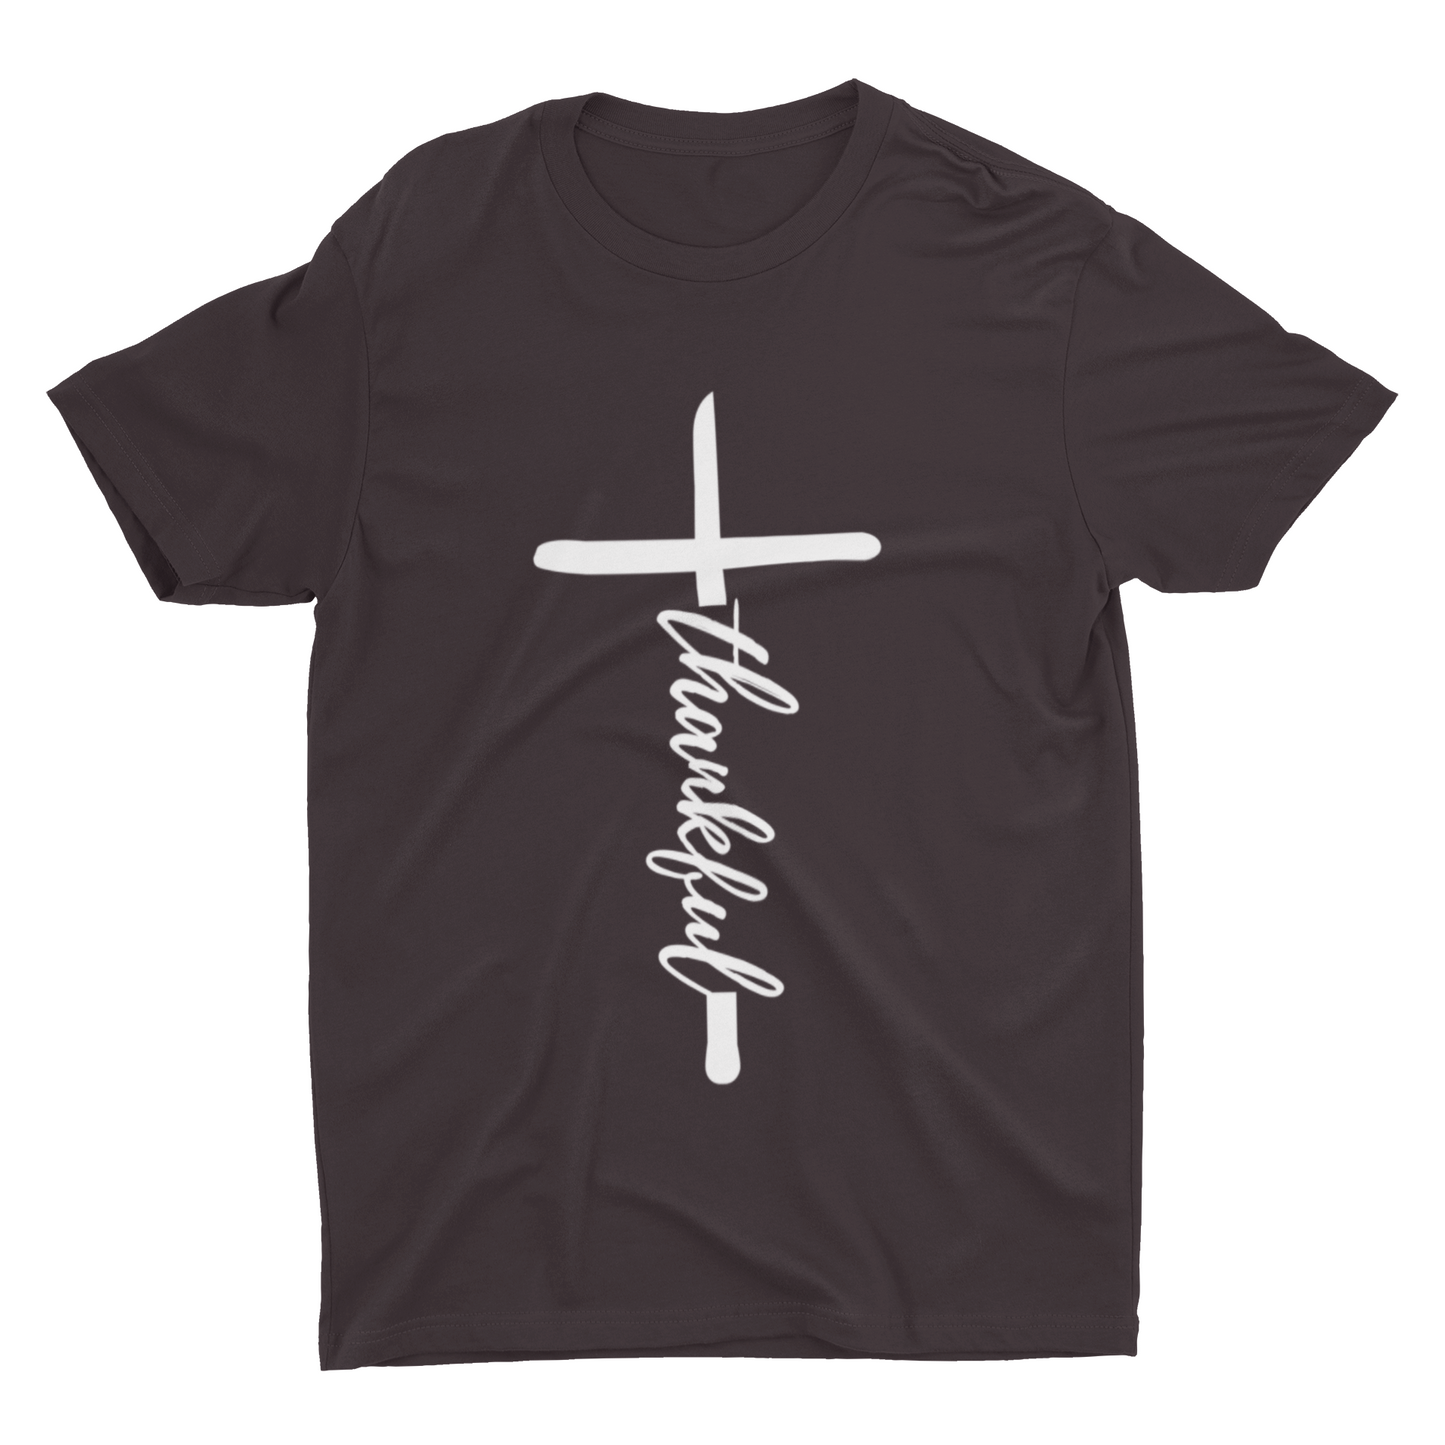 Thankful cross graphic t-shirt for fall